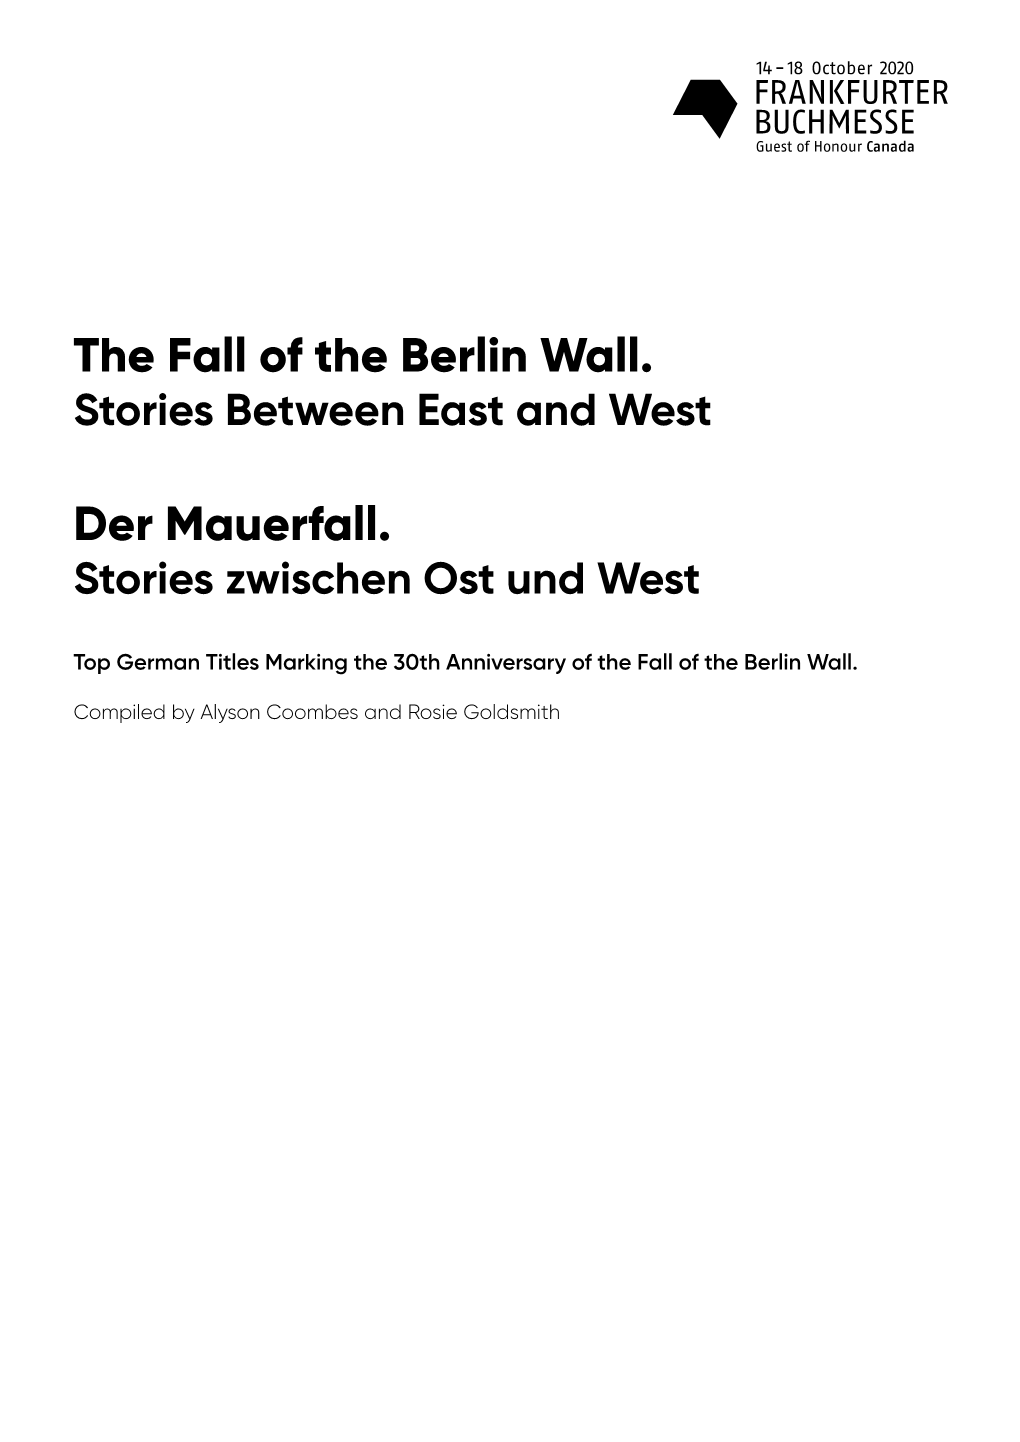 The Fall of the Berlin Wall. Der Mauerfall